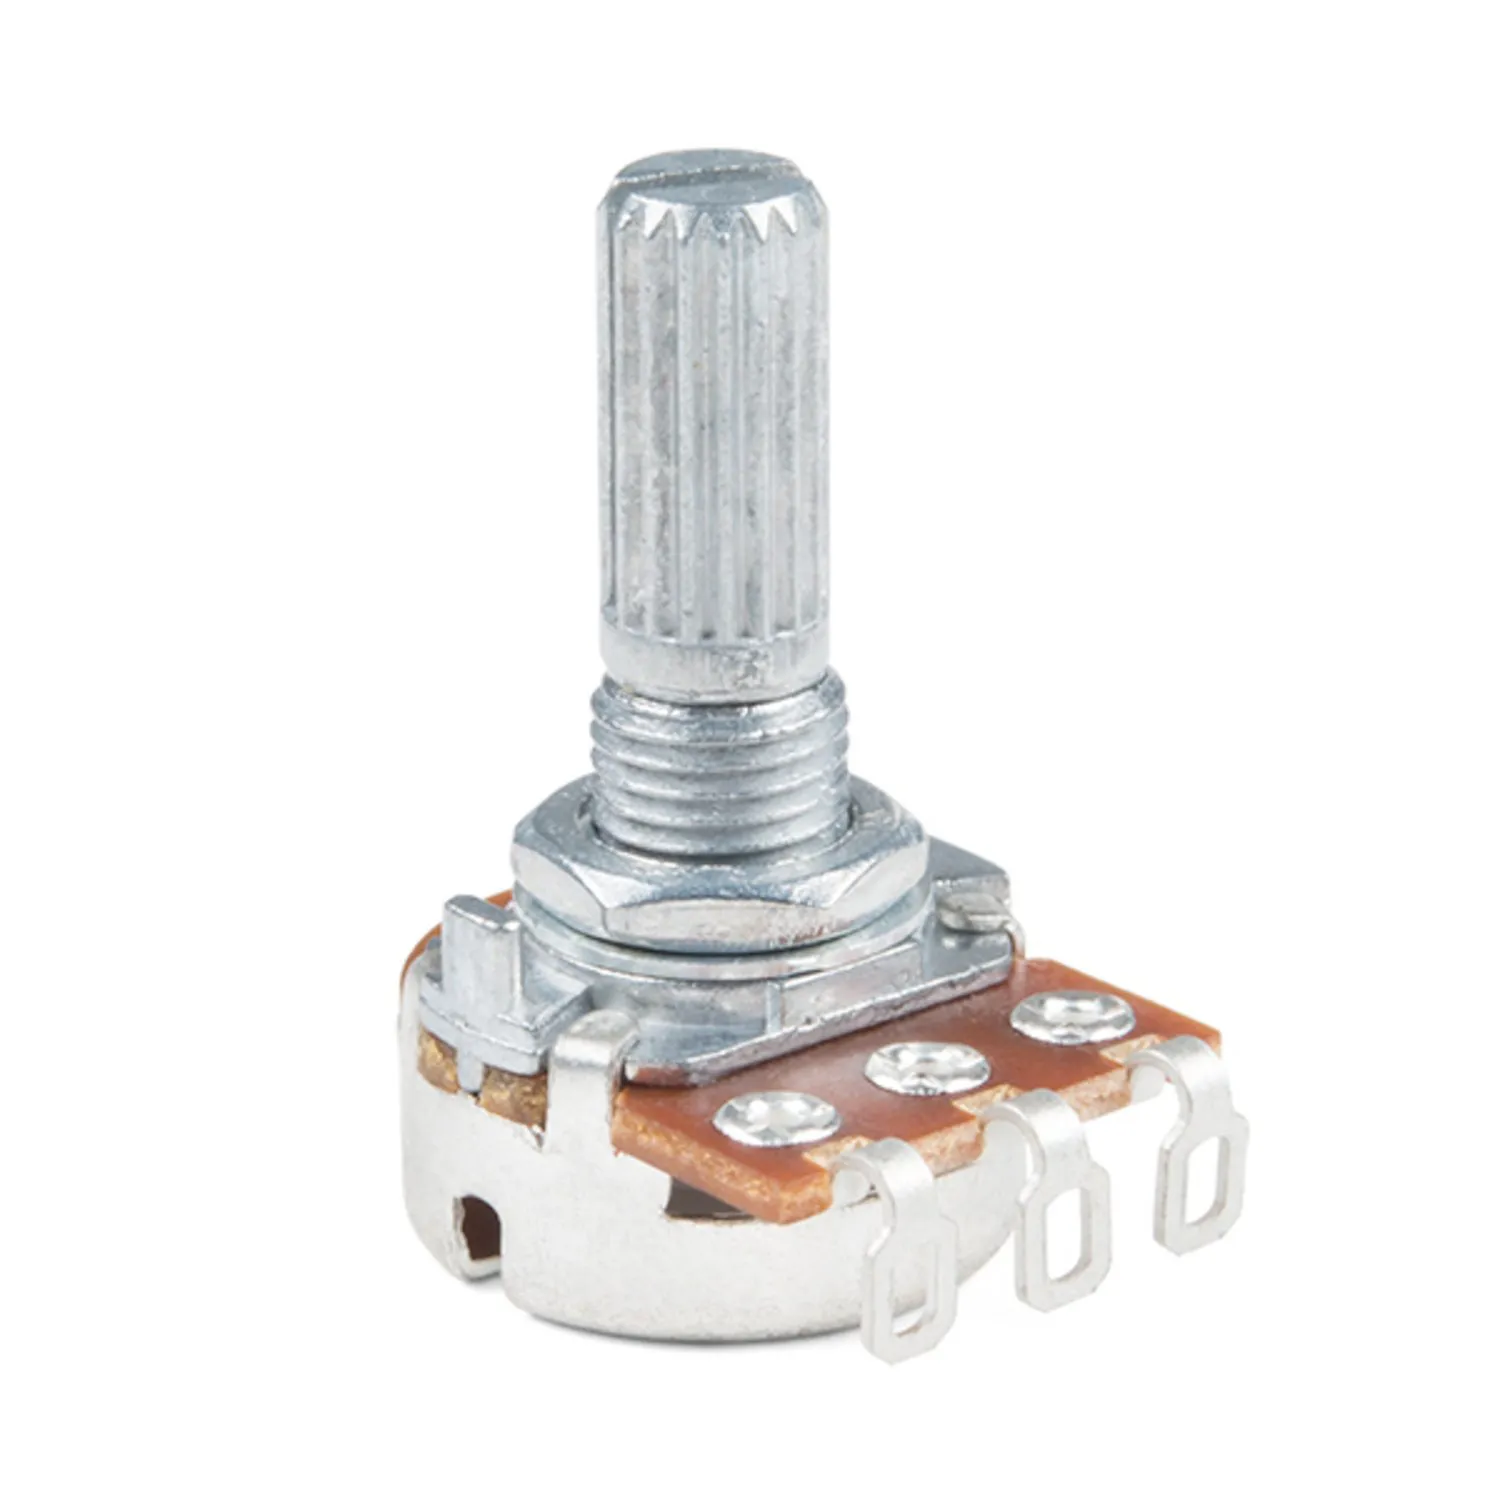 Photo of Rotary Potentiometer - 100k Ohm, Linear (Panel Mount)